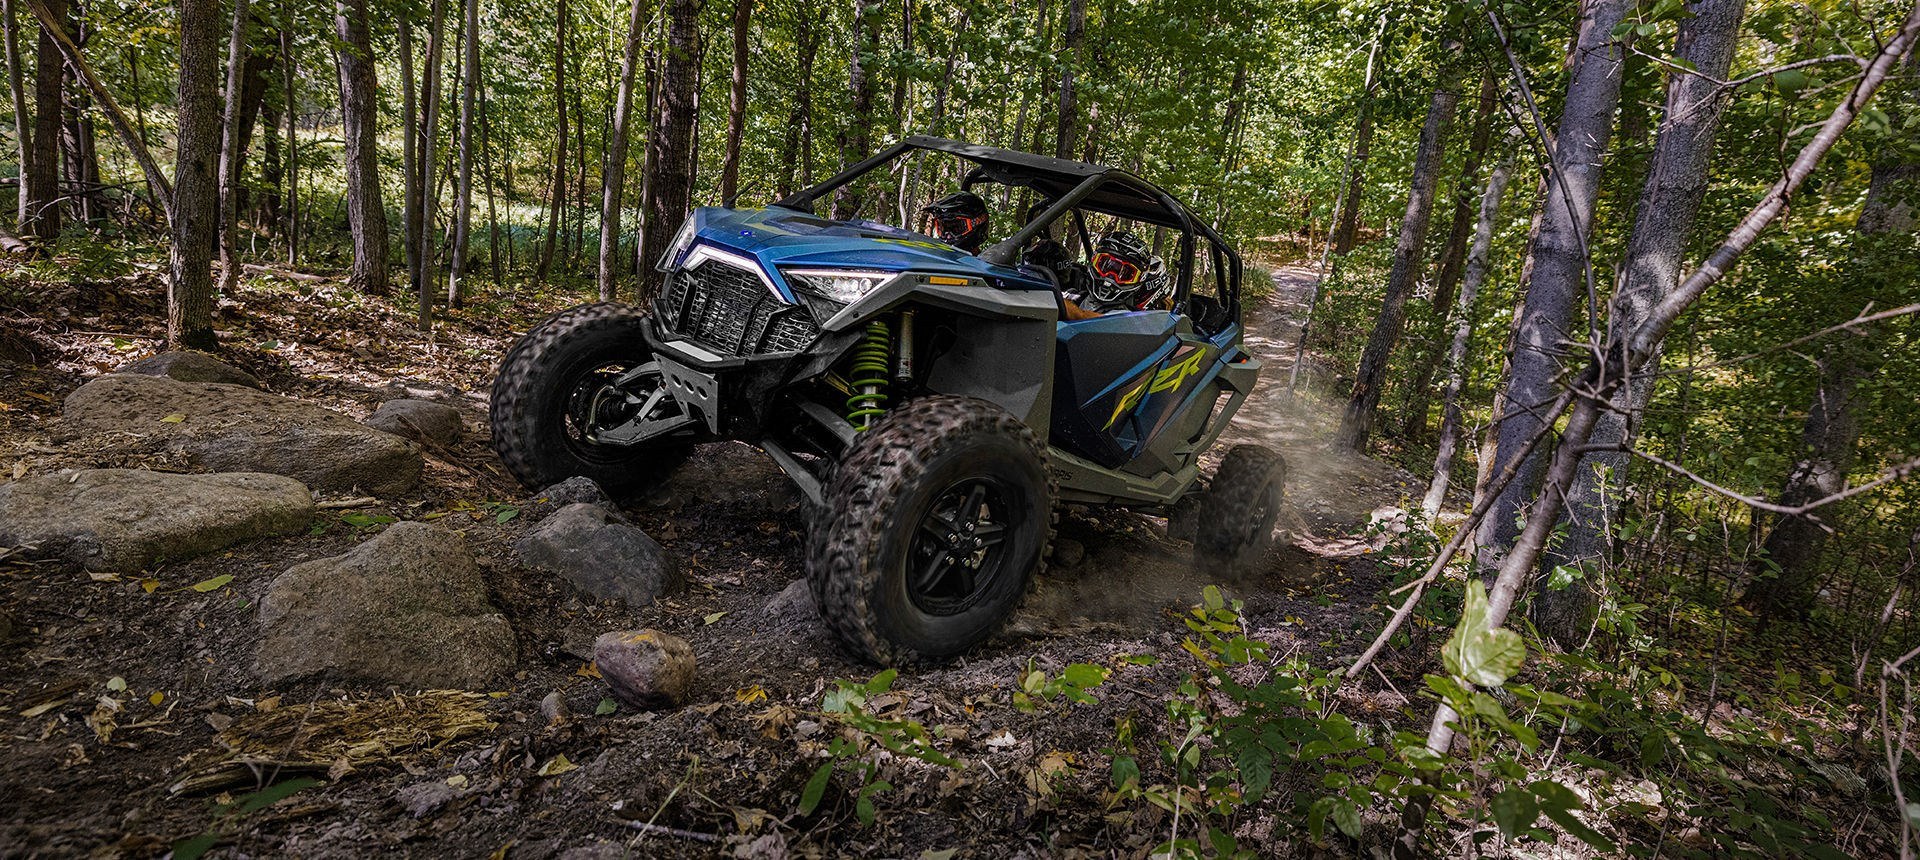 2022 Polaris RZR Turbo R 4 Premium - Ride Command Package in Clinton, Tennessee - Photo 4